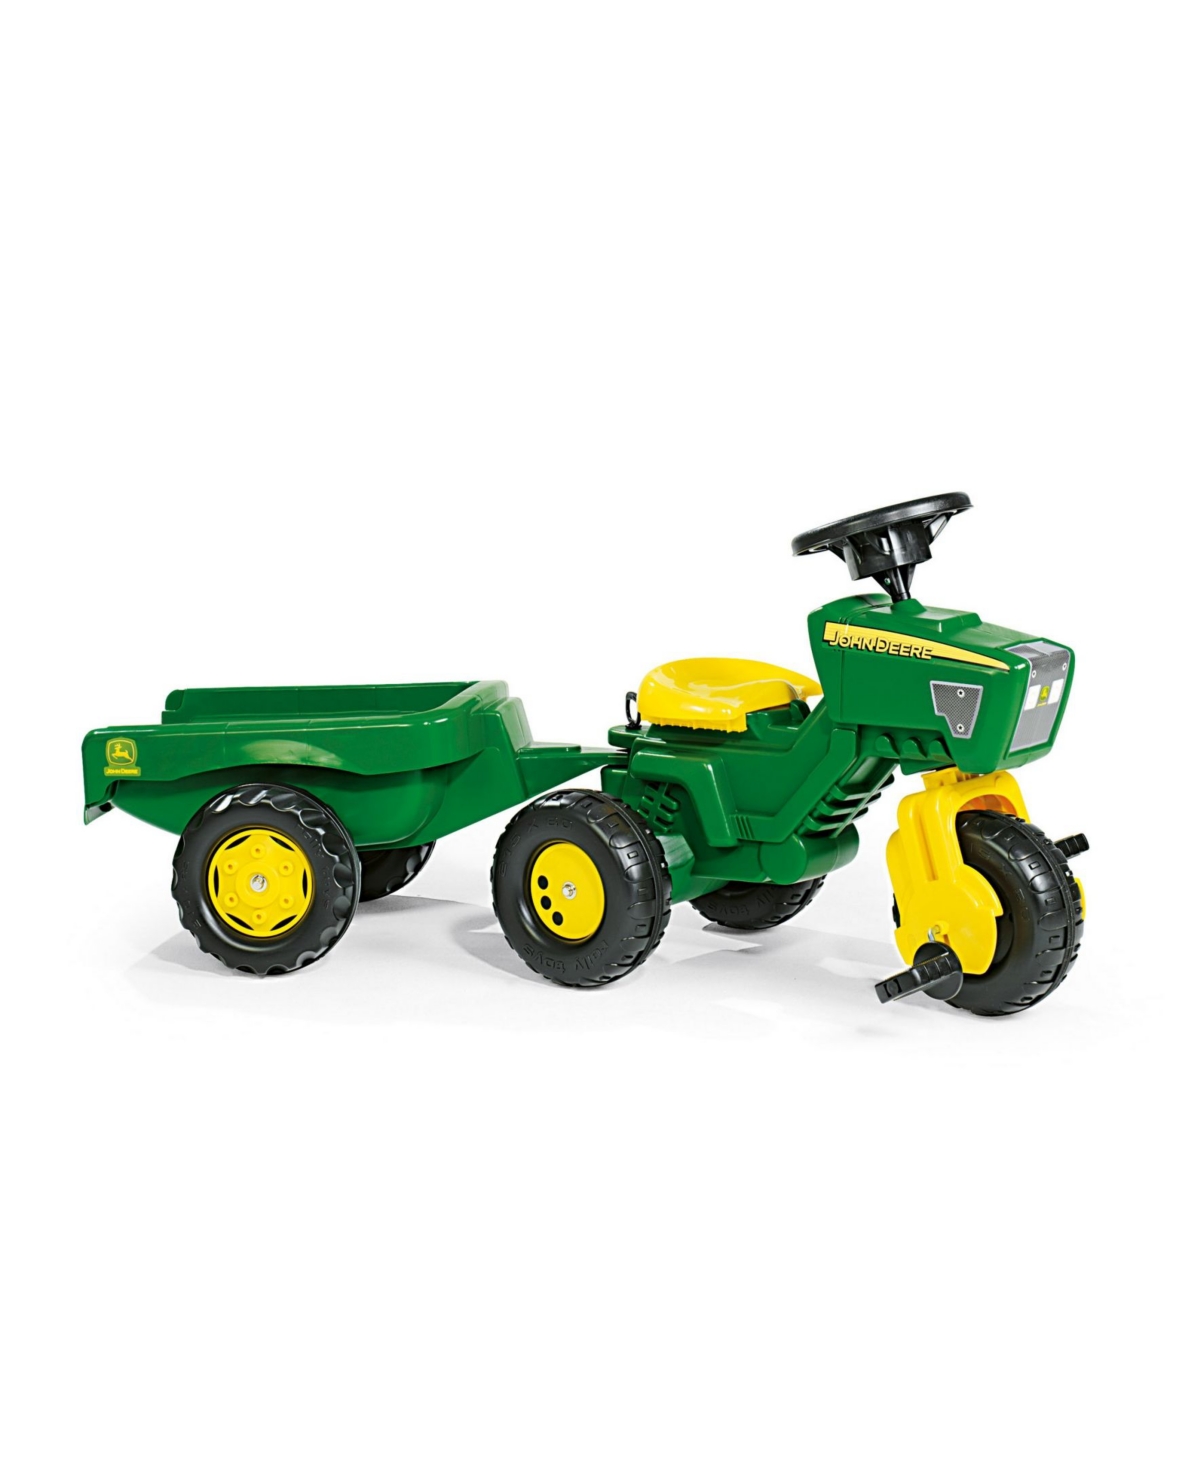 Rolly Kids' Toys John Deere 3 Wheel Trike Pedal Tractor With Removable Hauling Trailer In Green